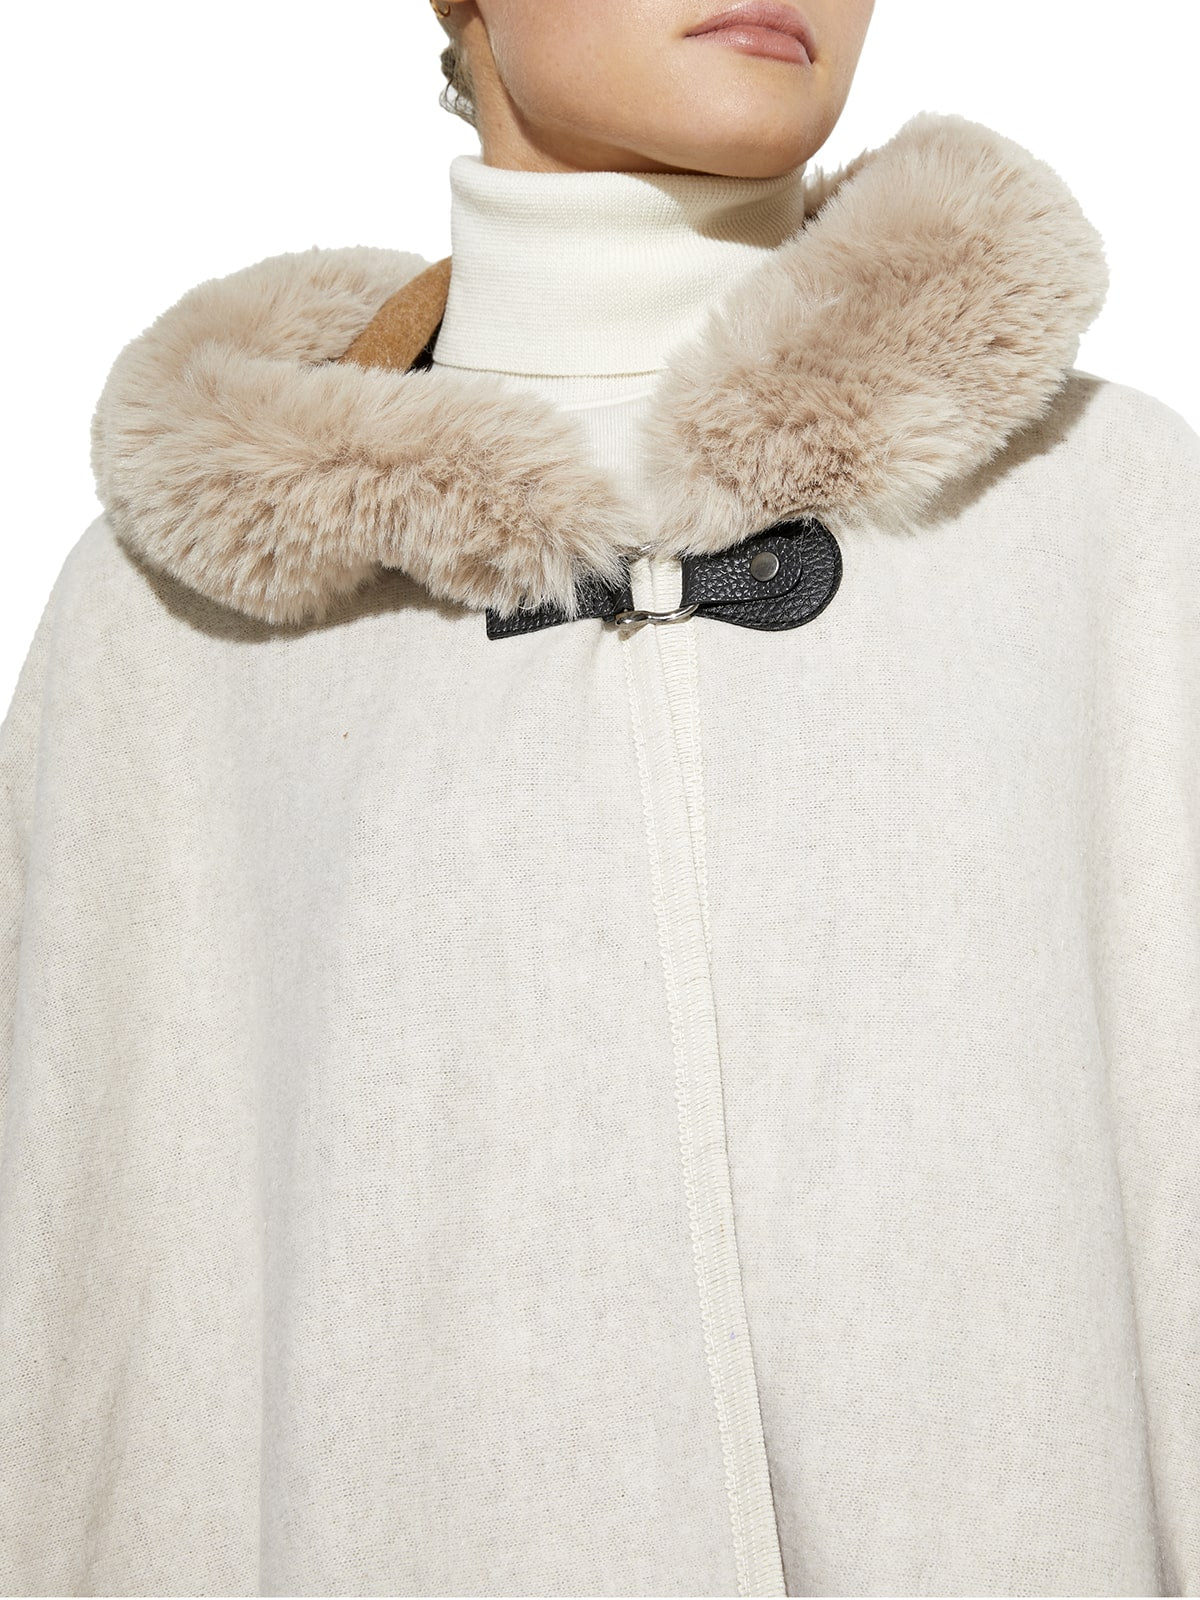 Montana Oatmeal Cape by Montique